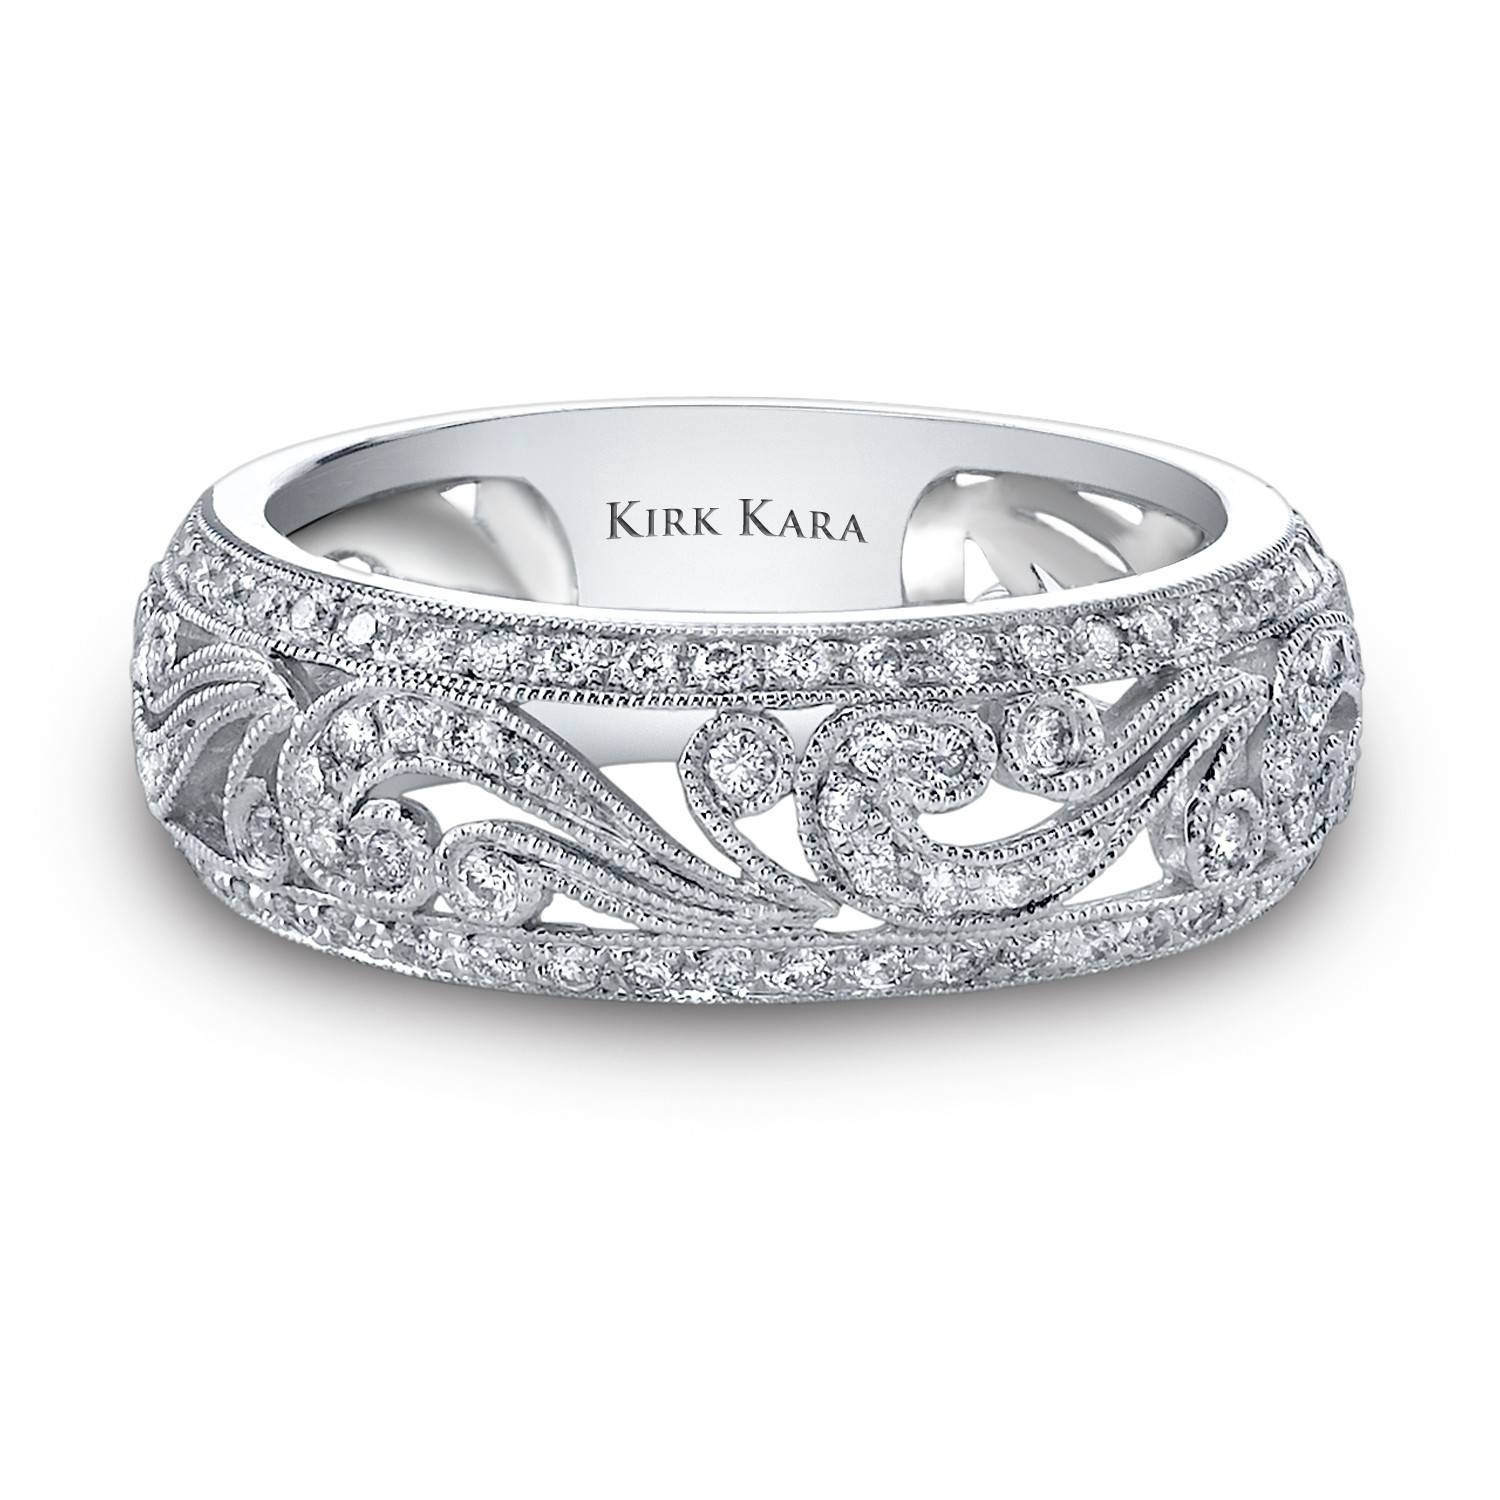 Womens Wedding Bands
 15 Ideas of Unique Womens Wedding Bands